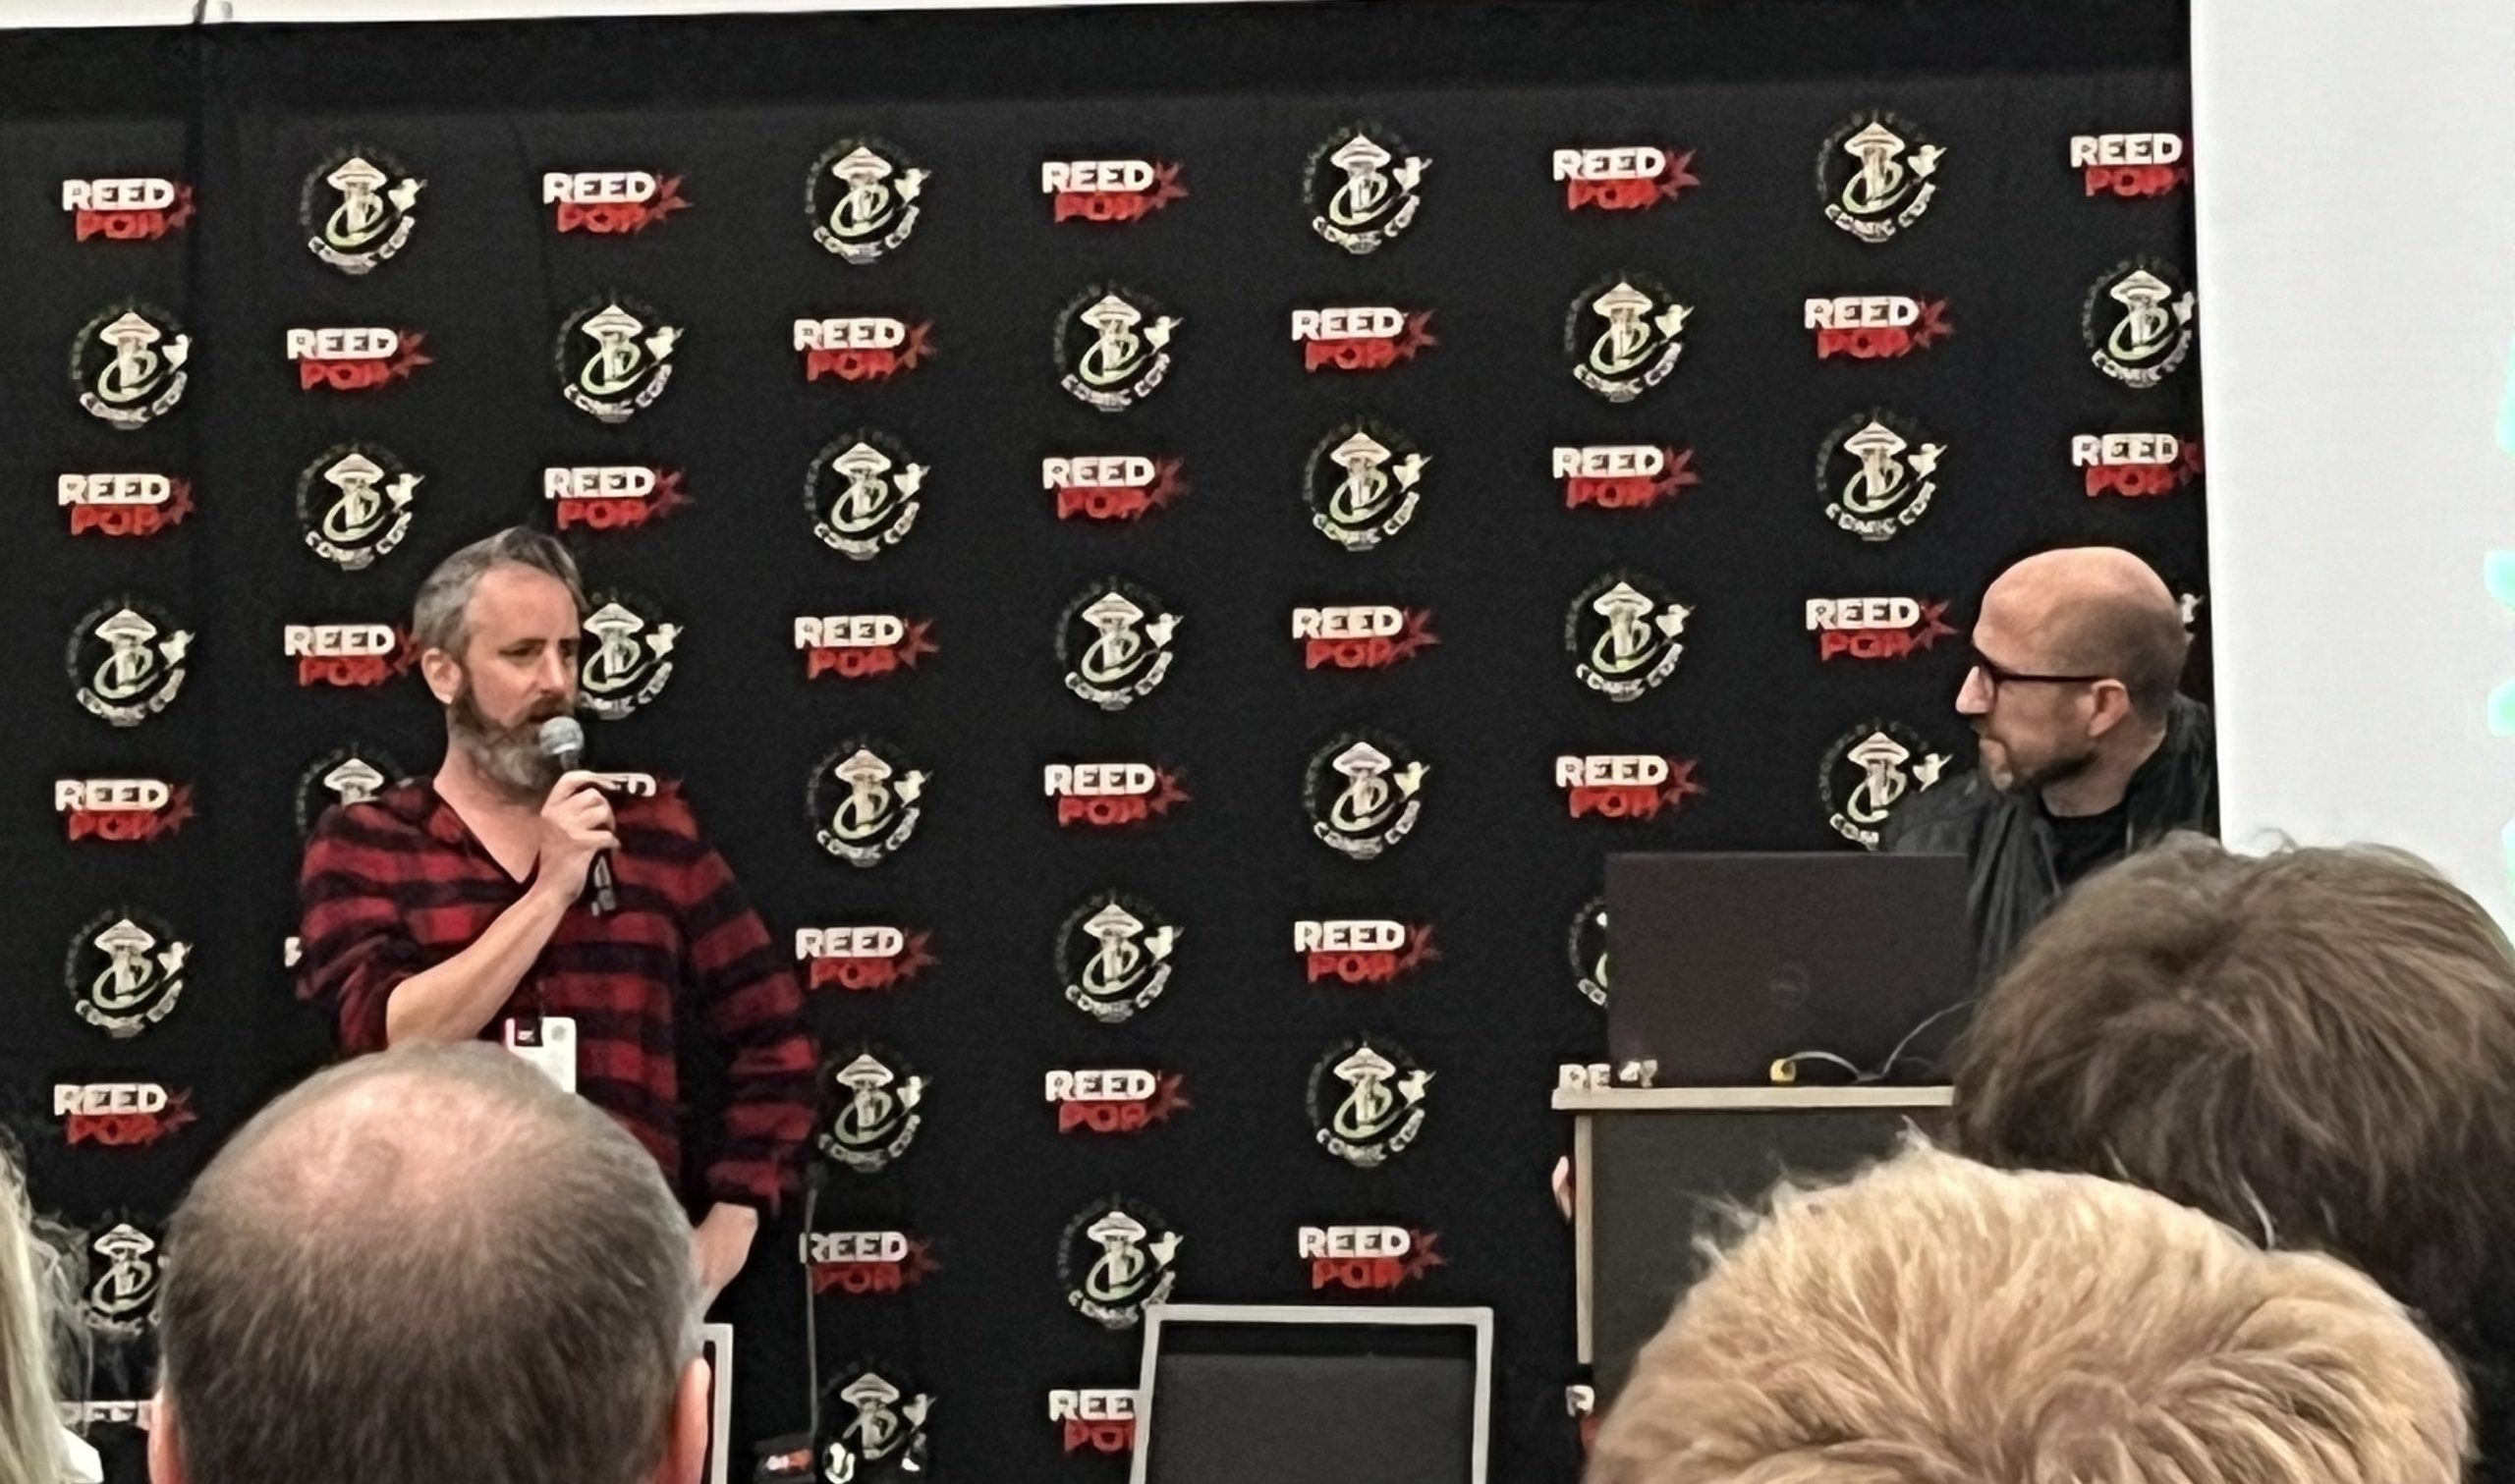 ECCC 2024: Chip Zdarsky talks comics, process, and crude jokes about microphones